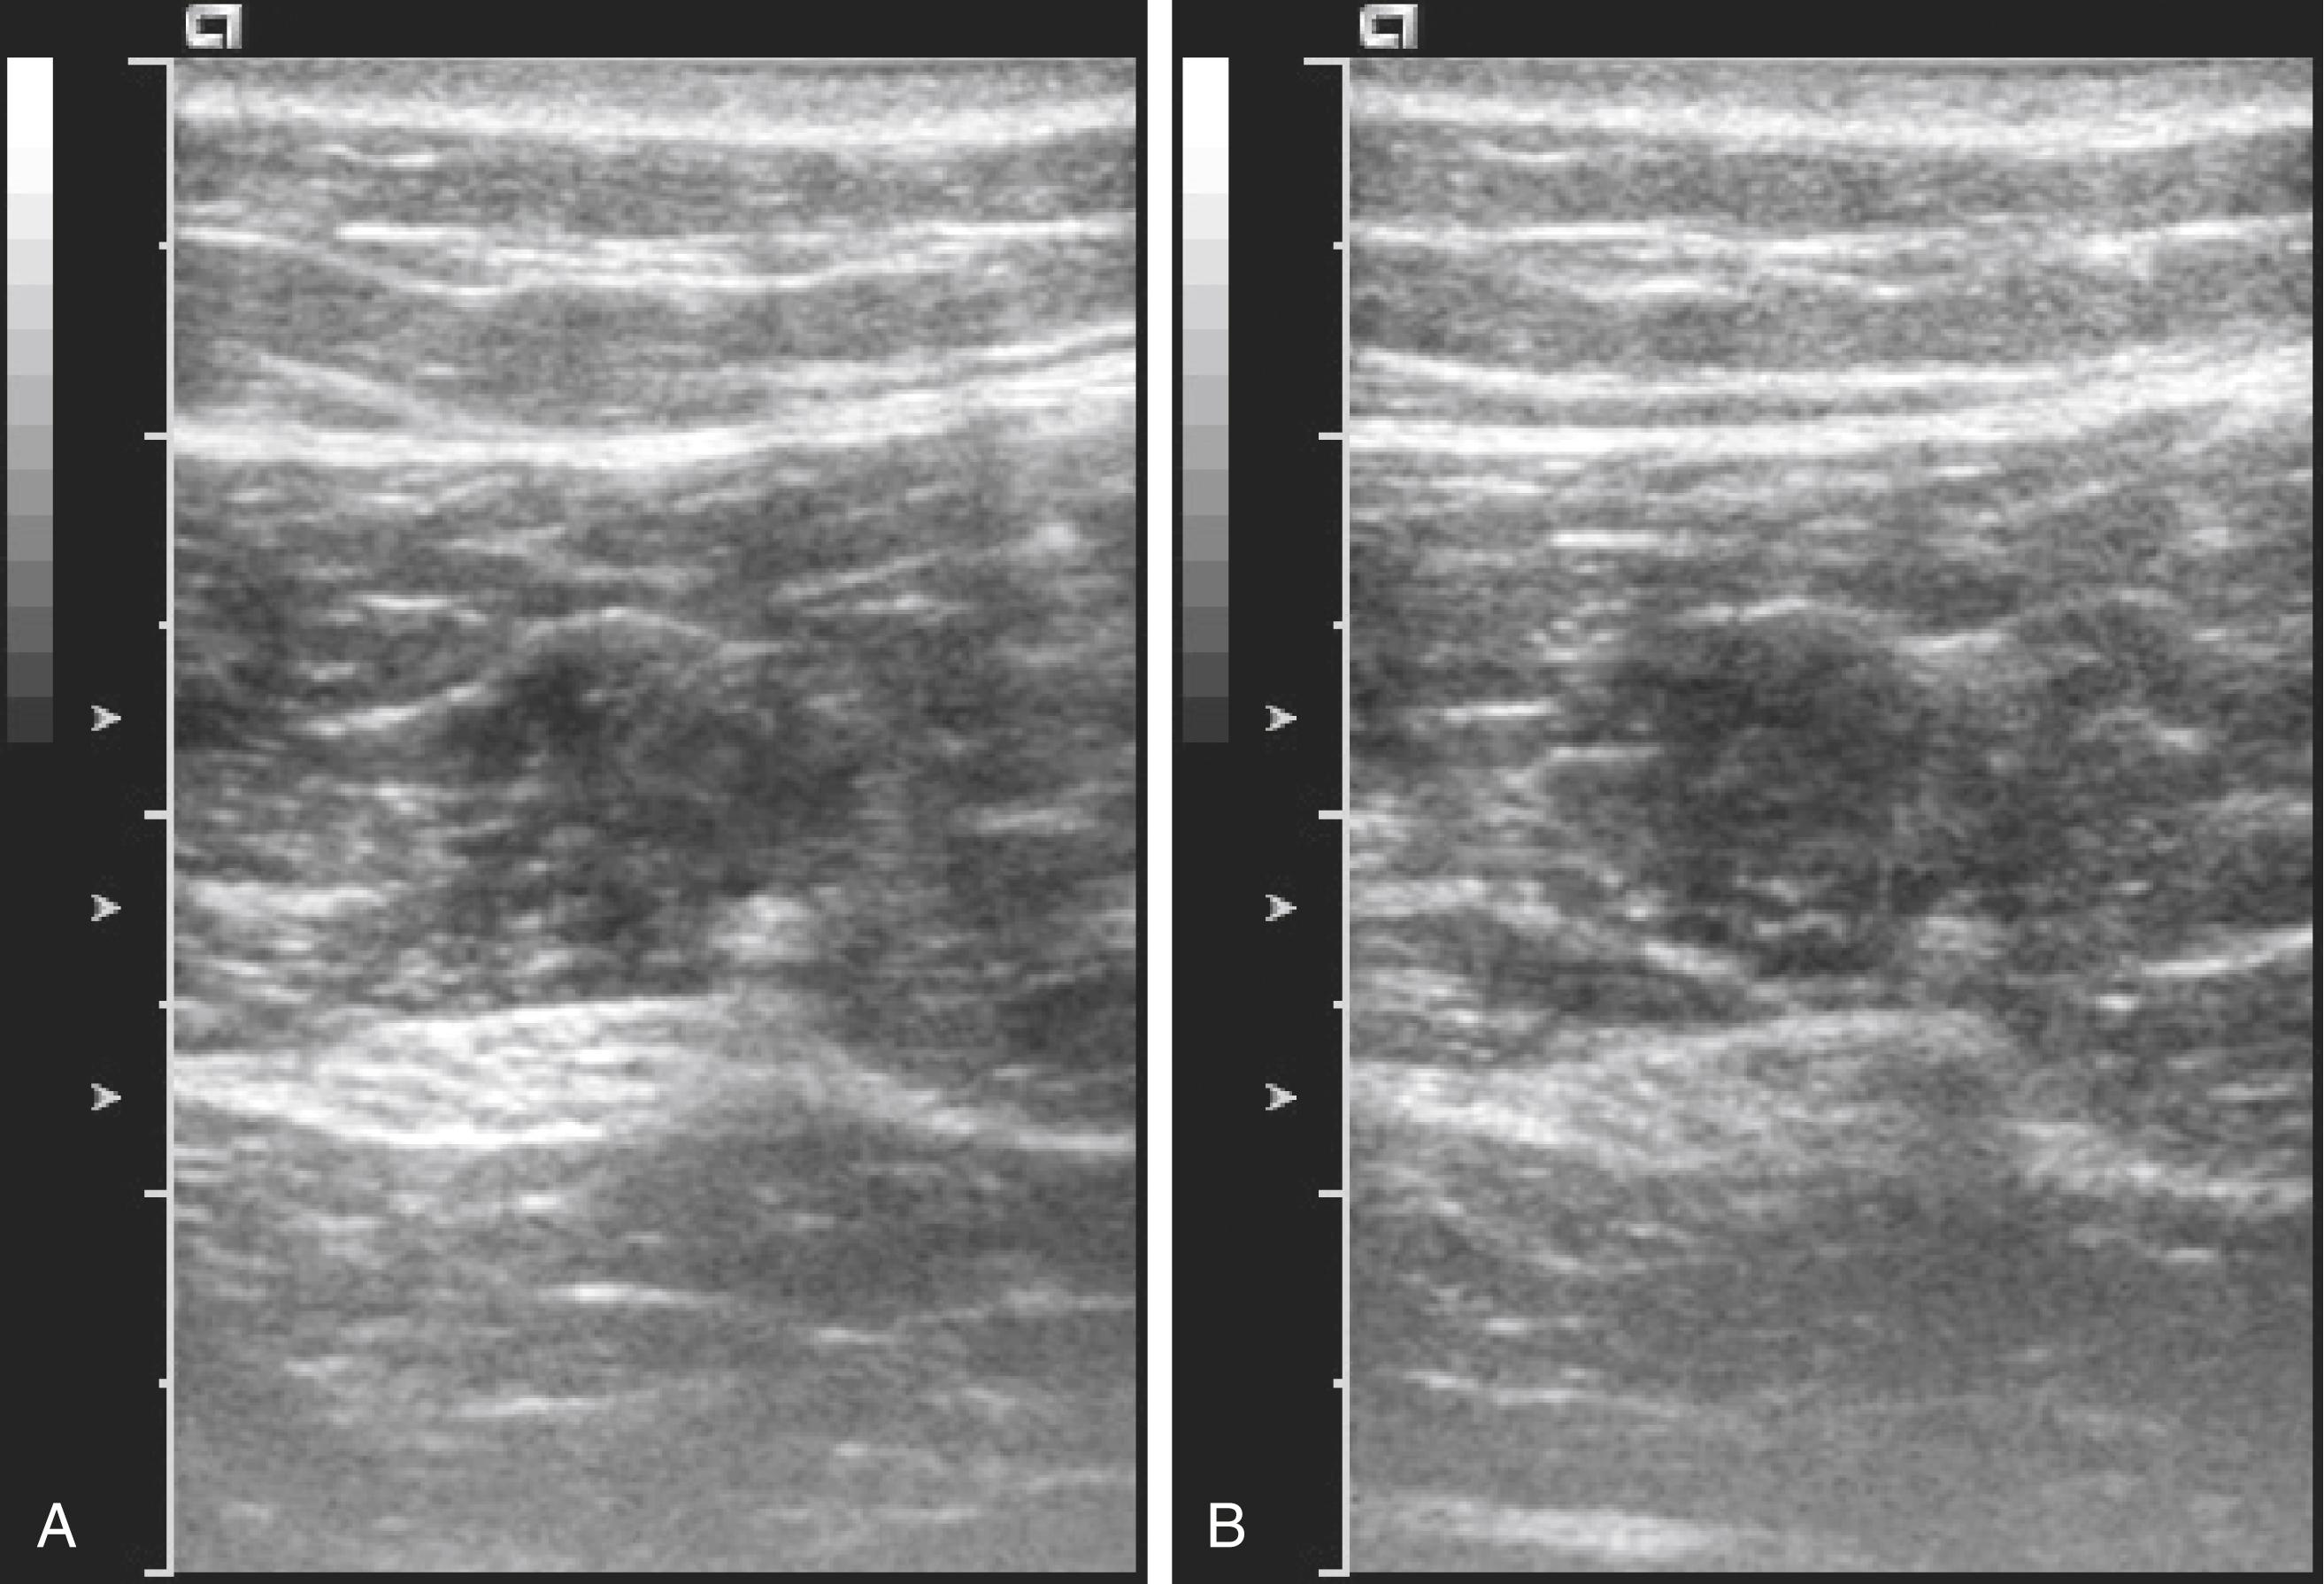 Fig. 46.7, (A) Sciatic nerve imaging in the subgluteal region. (B) The amplitude of the received echoes diminishes when the angle of insonation is changed away from perpendicular to the nerve path, thereby demonstrating anisotropy.